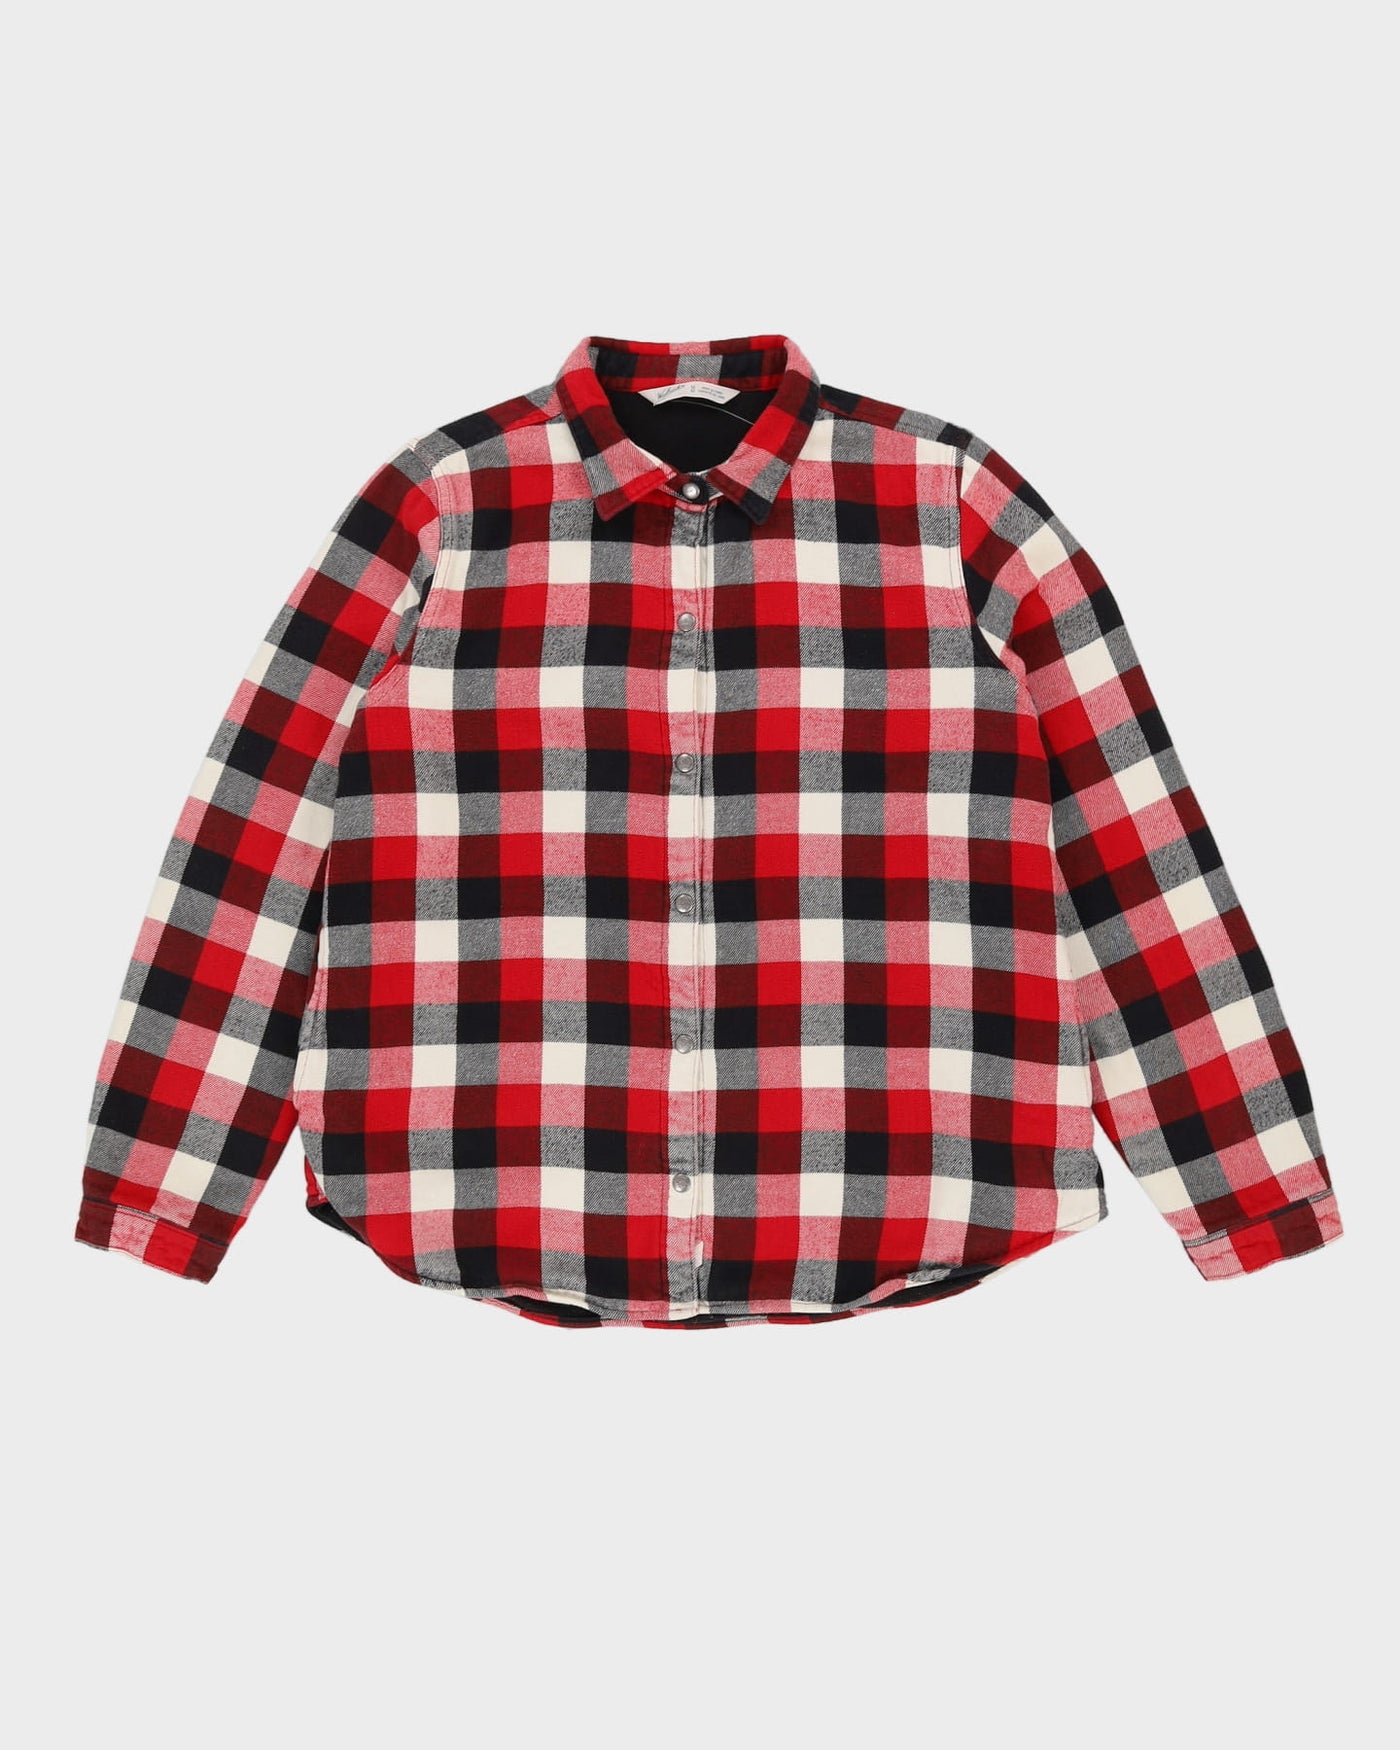 Eddie Bauer Red Check Patterned Padded Flannel Shirt - M